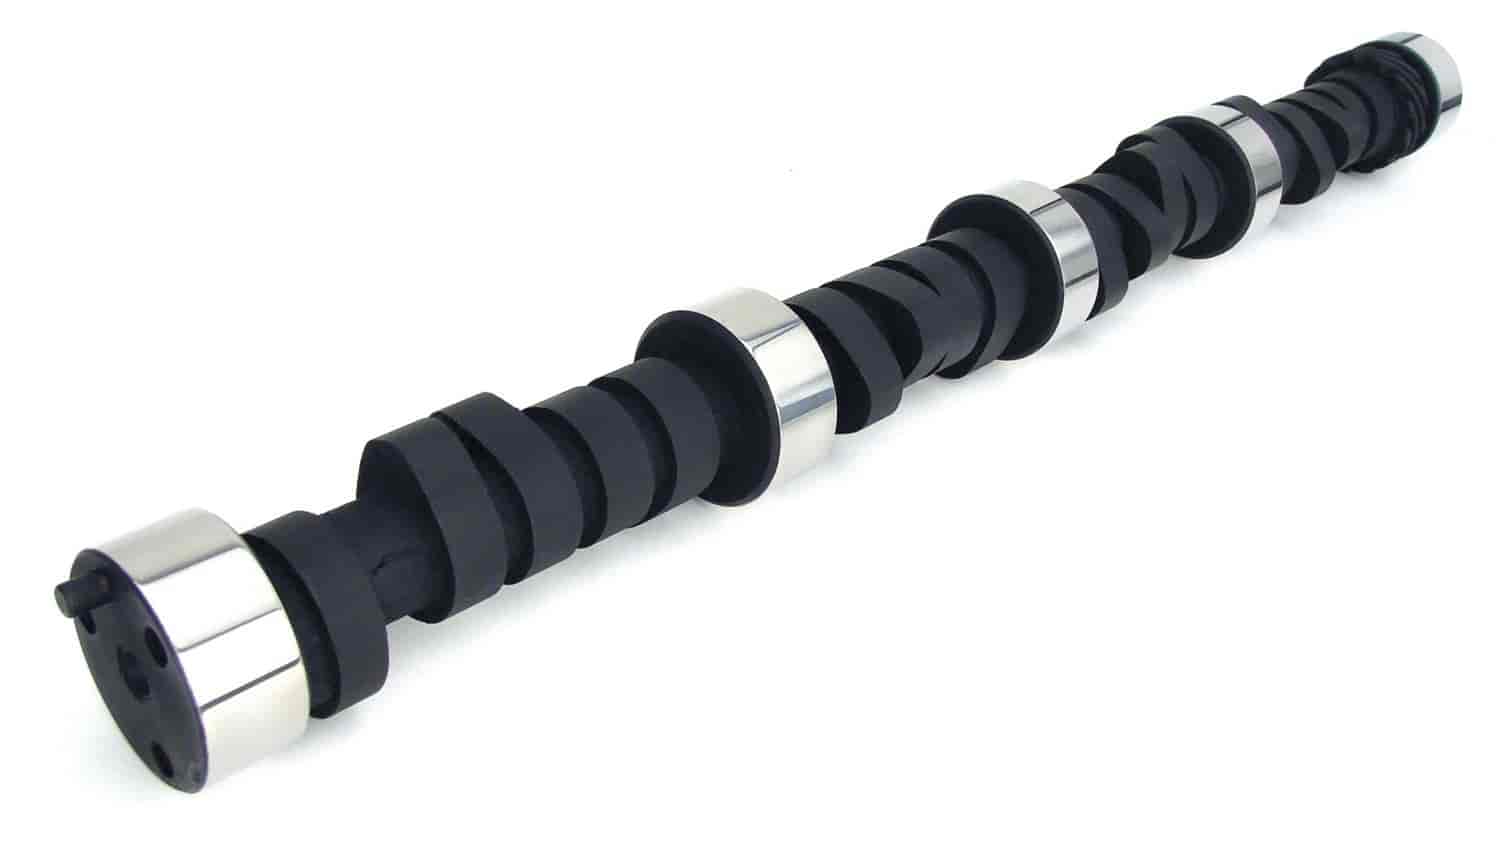 Xtreme Energy 256H Hydraulic Flat Tappet Camshaft Only Lift: .447" /.454" Duration: 256°/268° RPM Range: 1000-5200